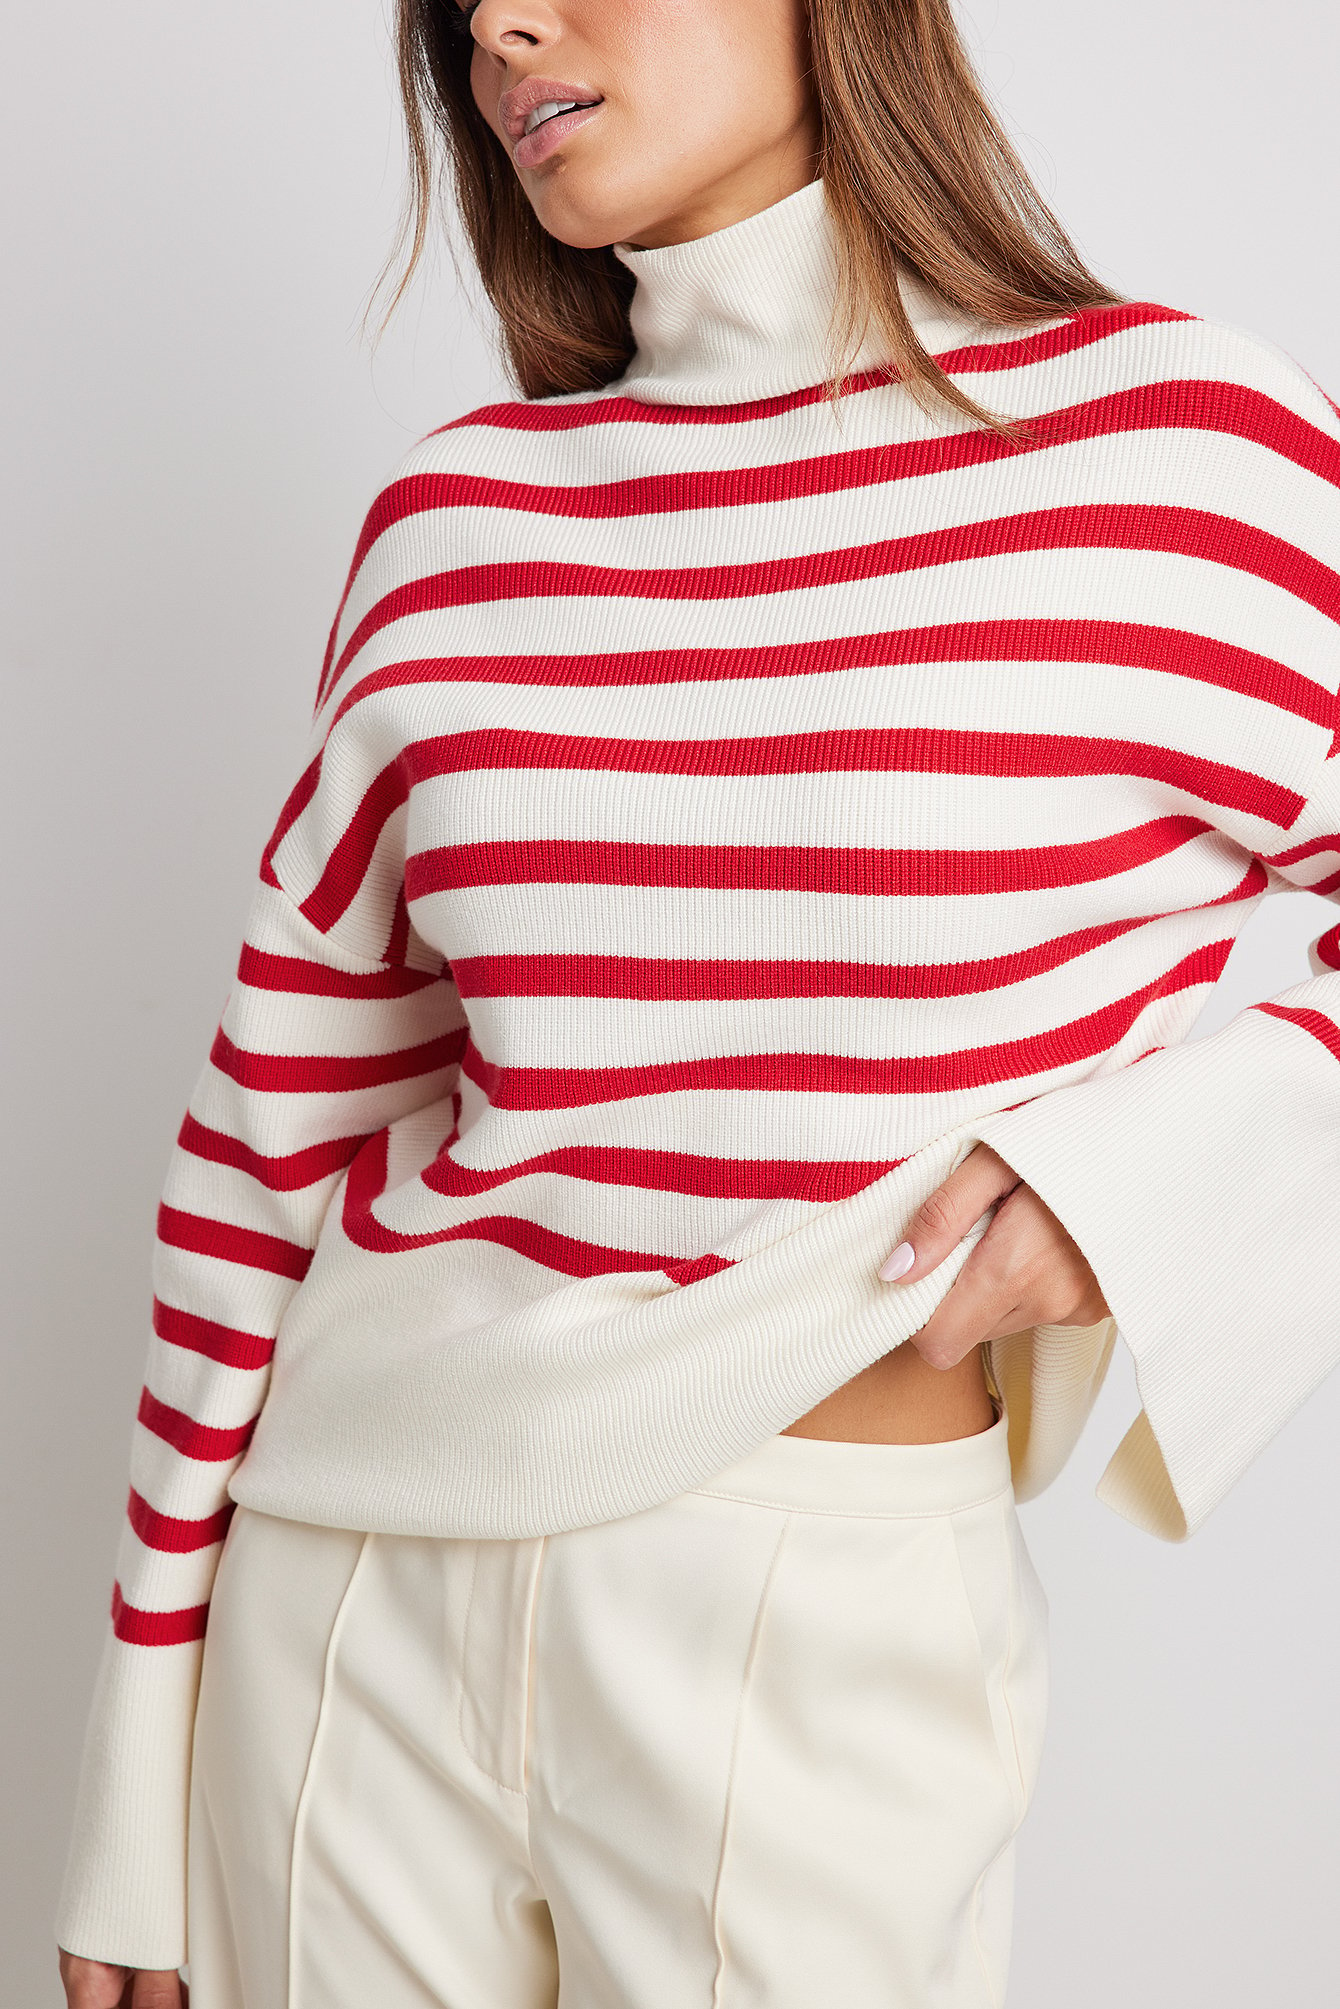 Mode Sweaters Oversized truien Finery Oversized trui rood gestippeld casual uitstraling 